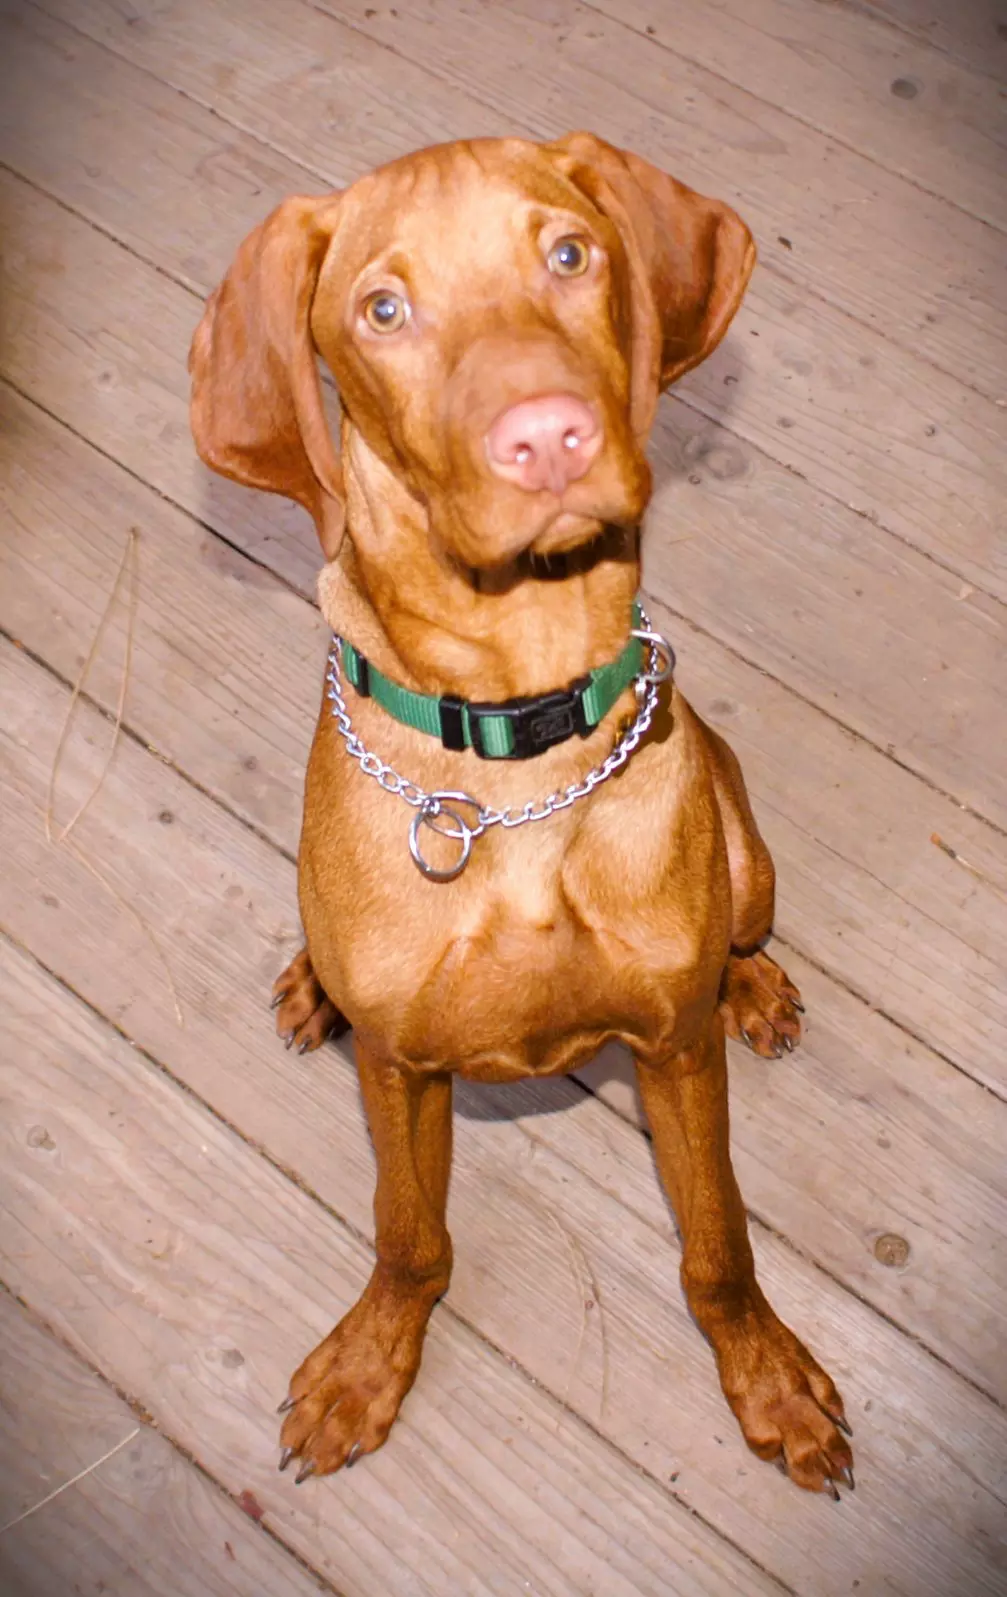 Brown dog with green collar on wooden floor.